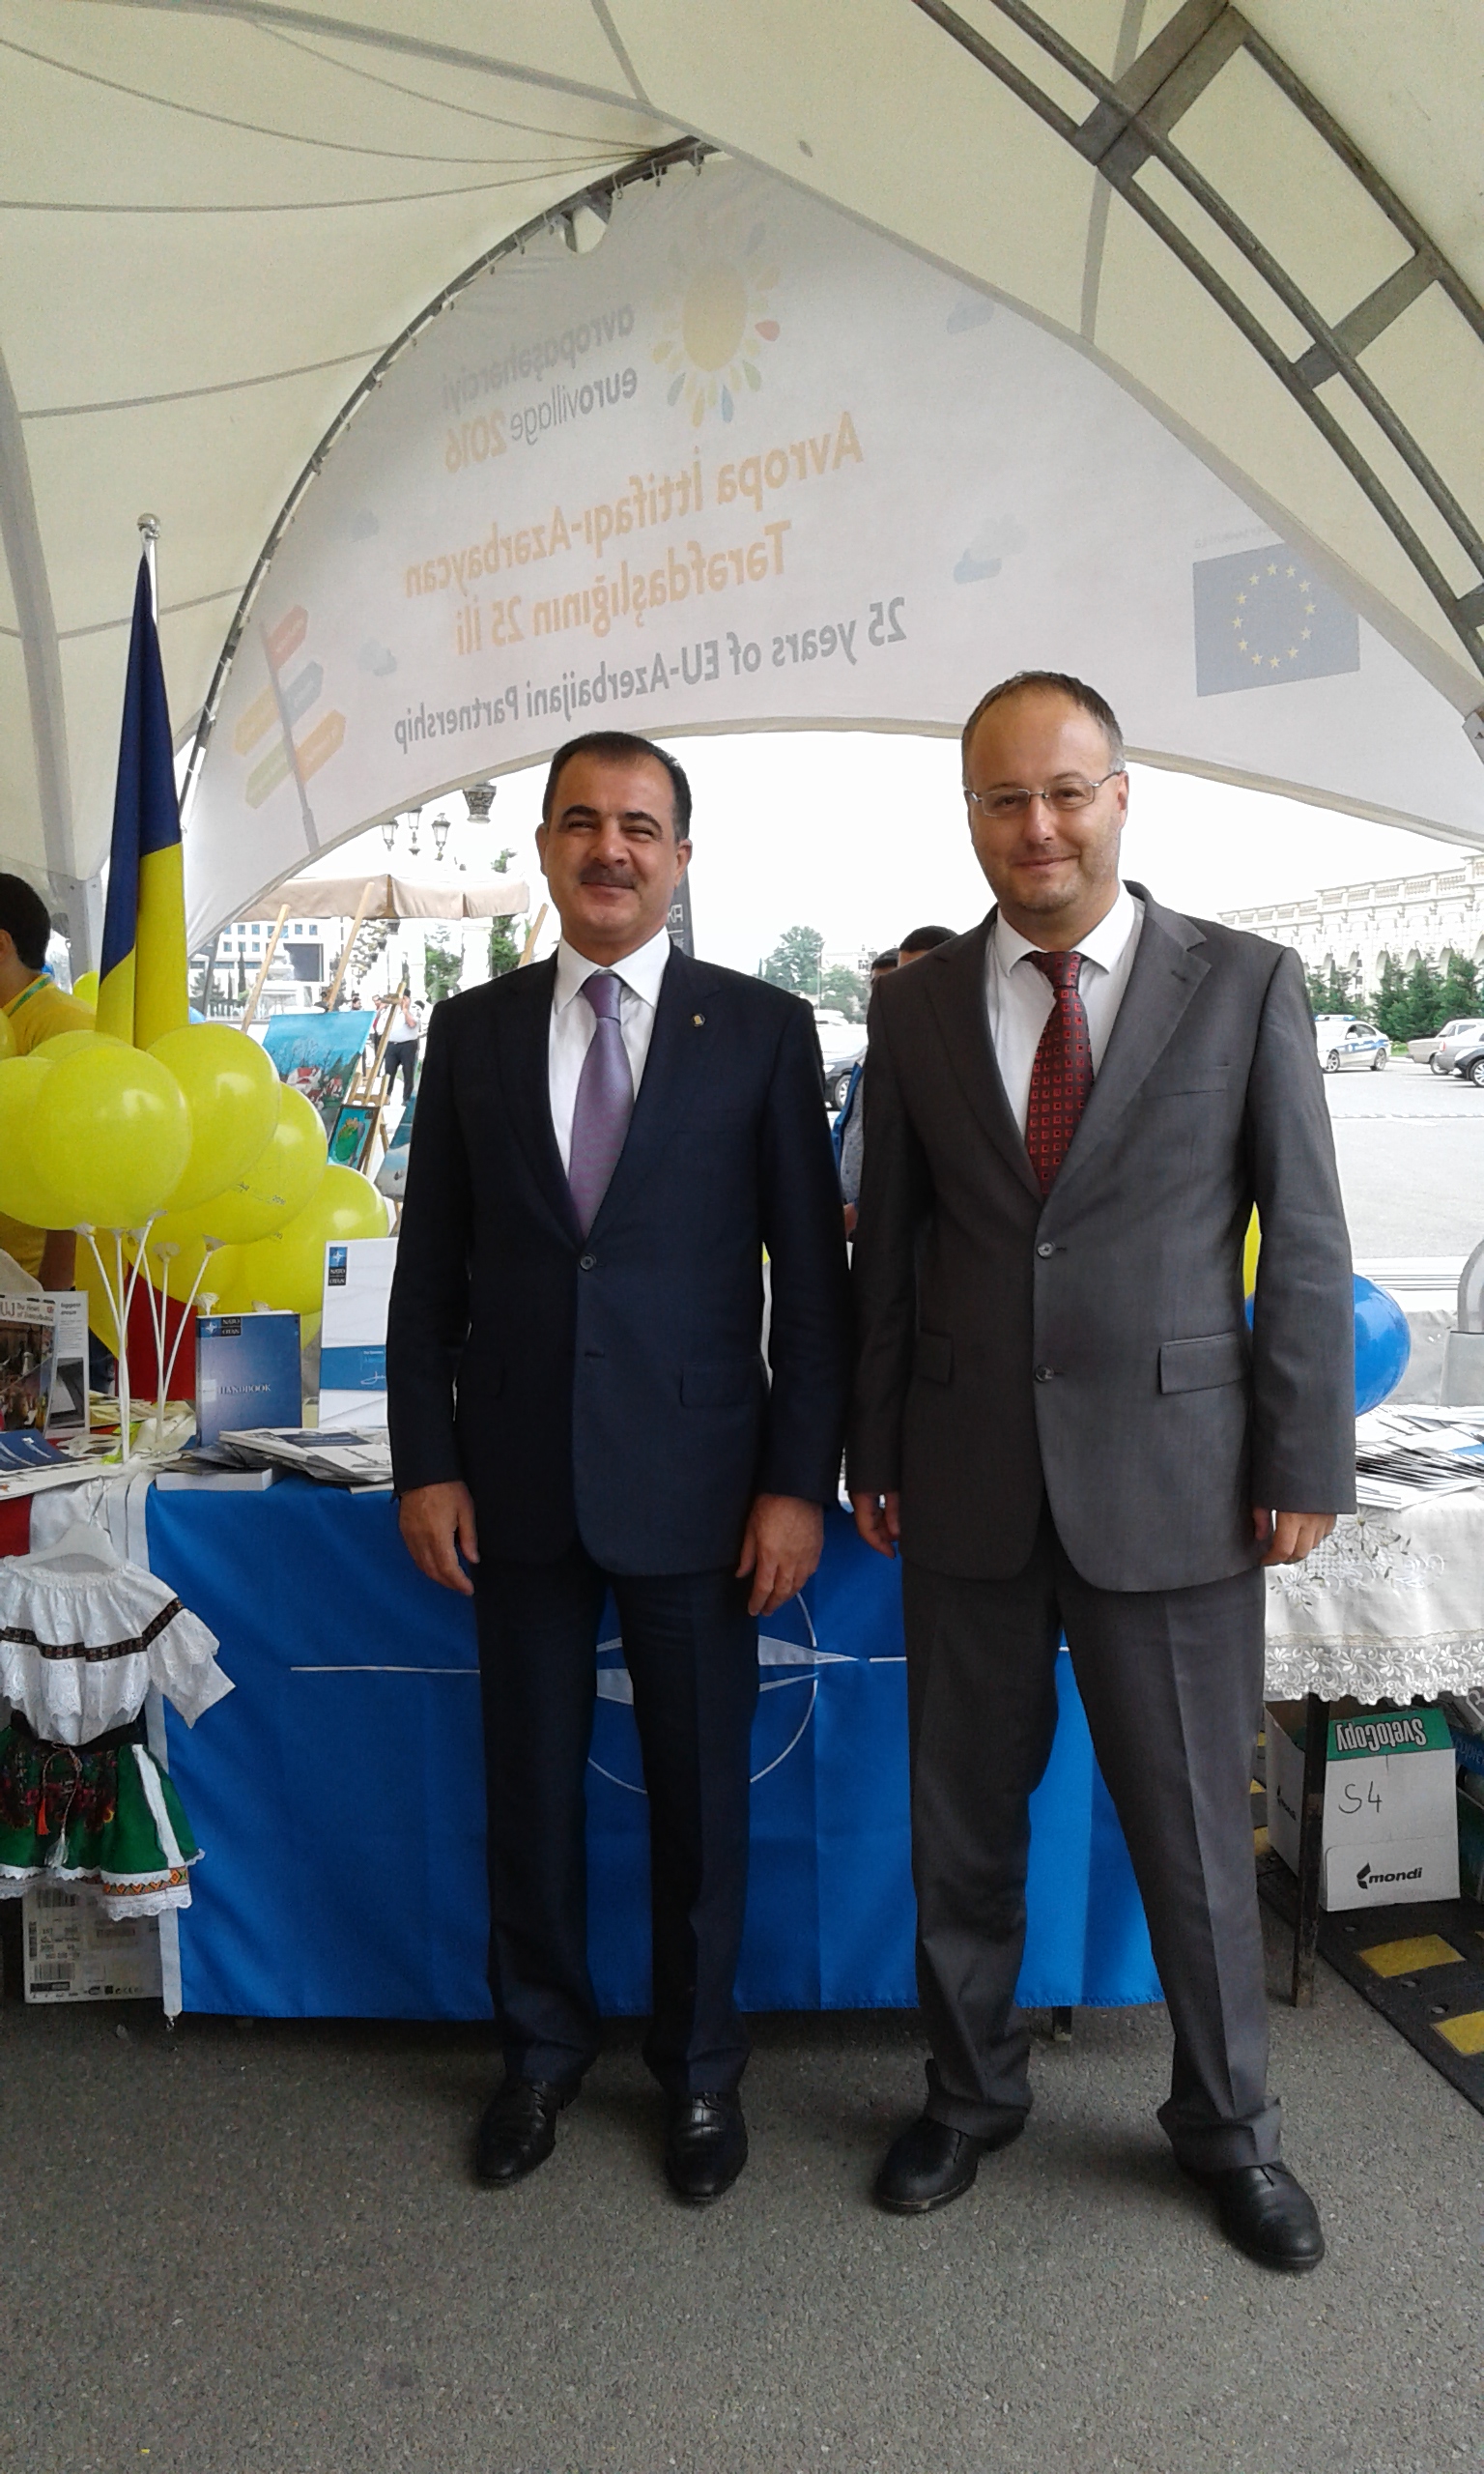 NATO presented at EuroVillage event in Ganja